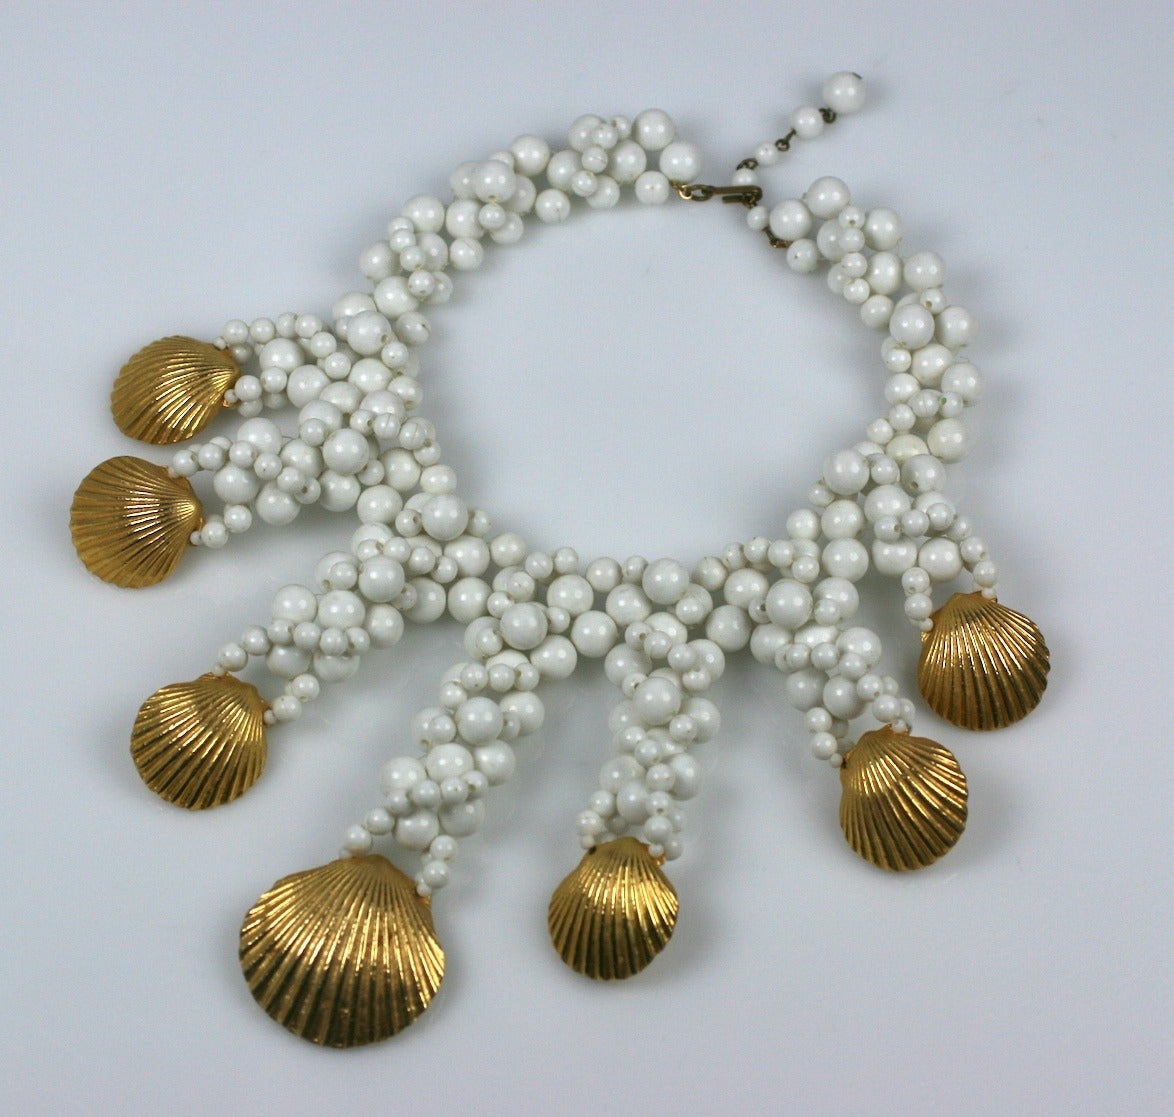 Gilt Shell and Woven Bead Bib from the 1960's. Extravagant scale with varied size white plastic beads forming tendrils down to gilt clams. 13-15